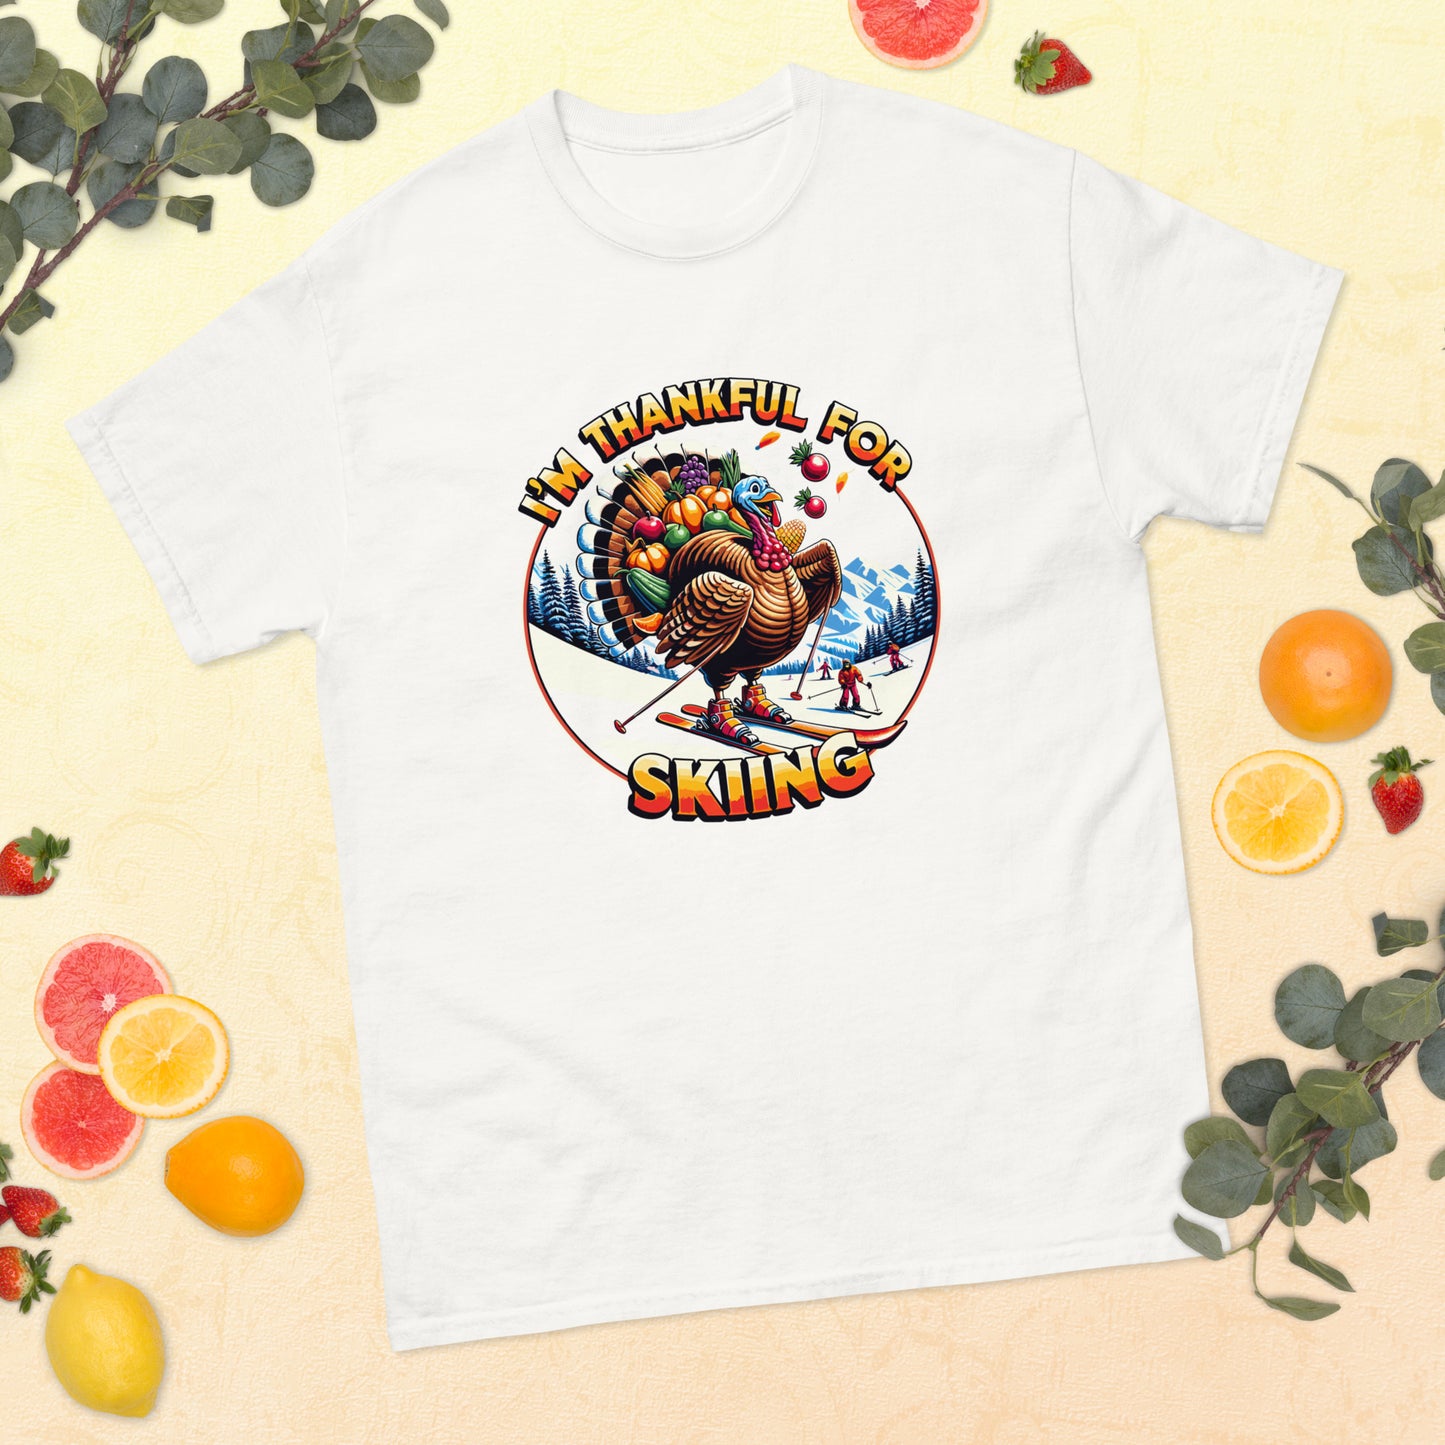 Thanksgiving turkey is thankful for skiing printed t-shirt by Whistler Shirts